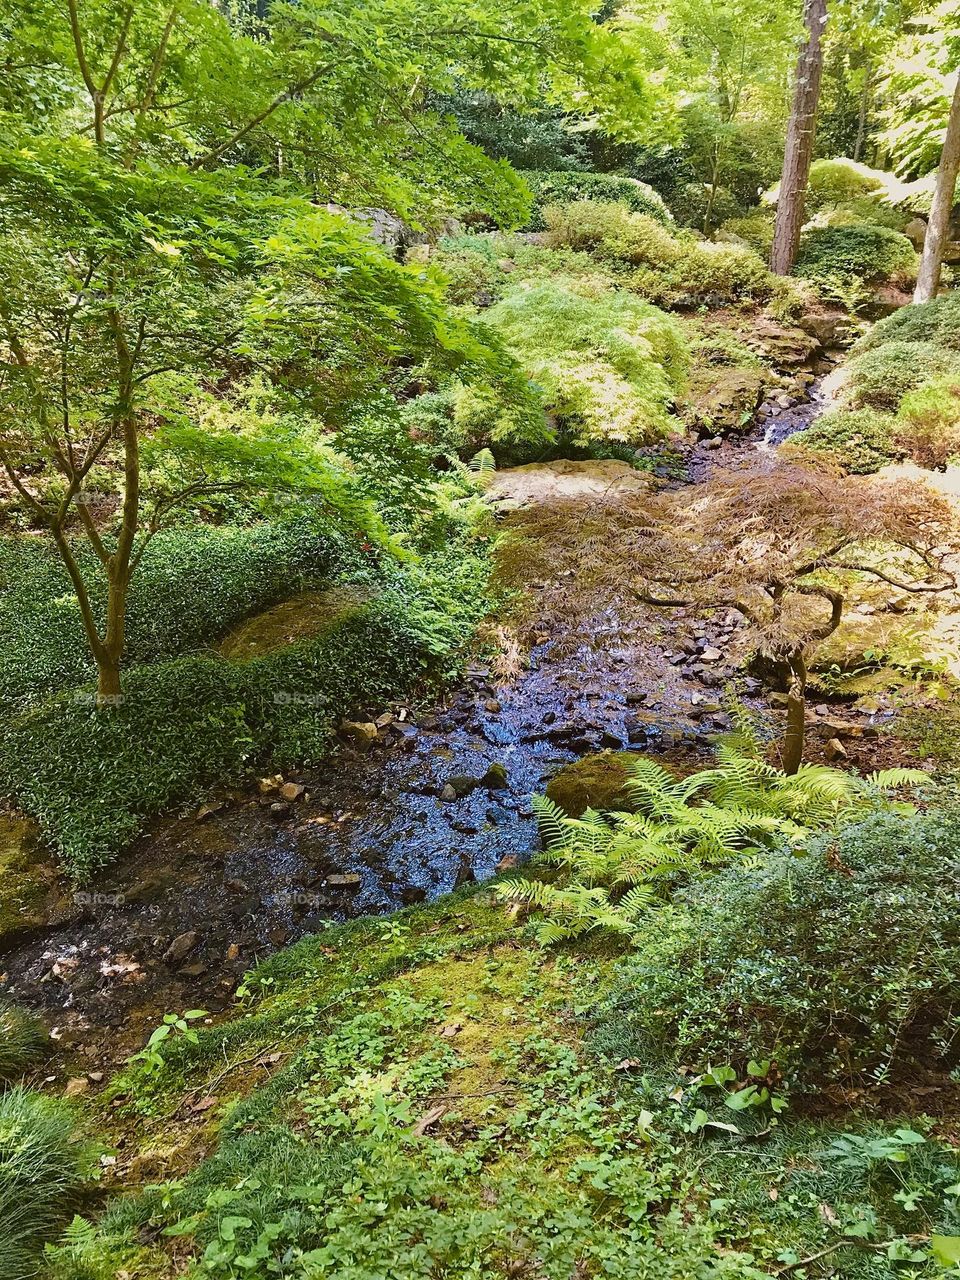 A shallow river or stream cutting through a lush, green wooded area. There is a lot of natural beauty coming through from the plant life and foliage, all lit by natural sunlight. 